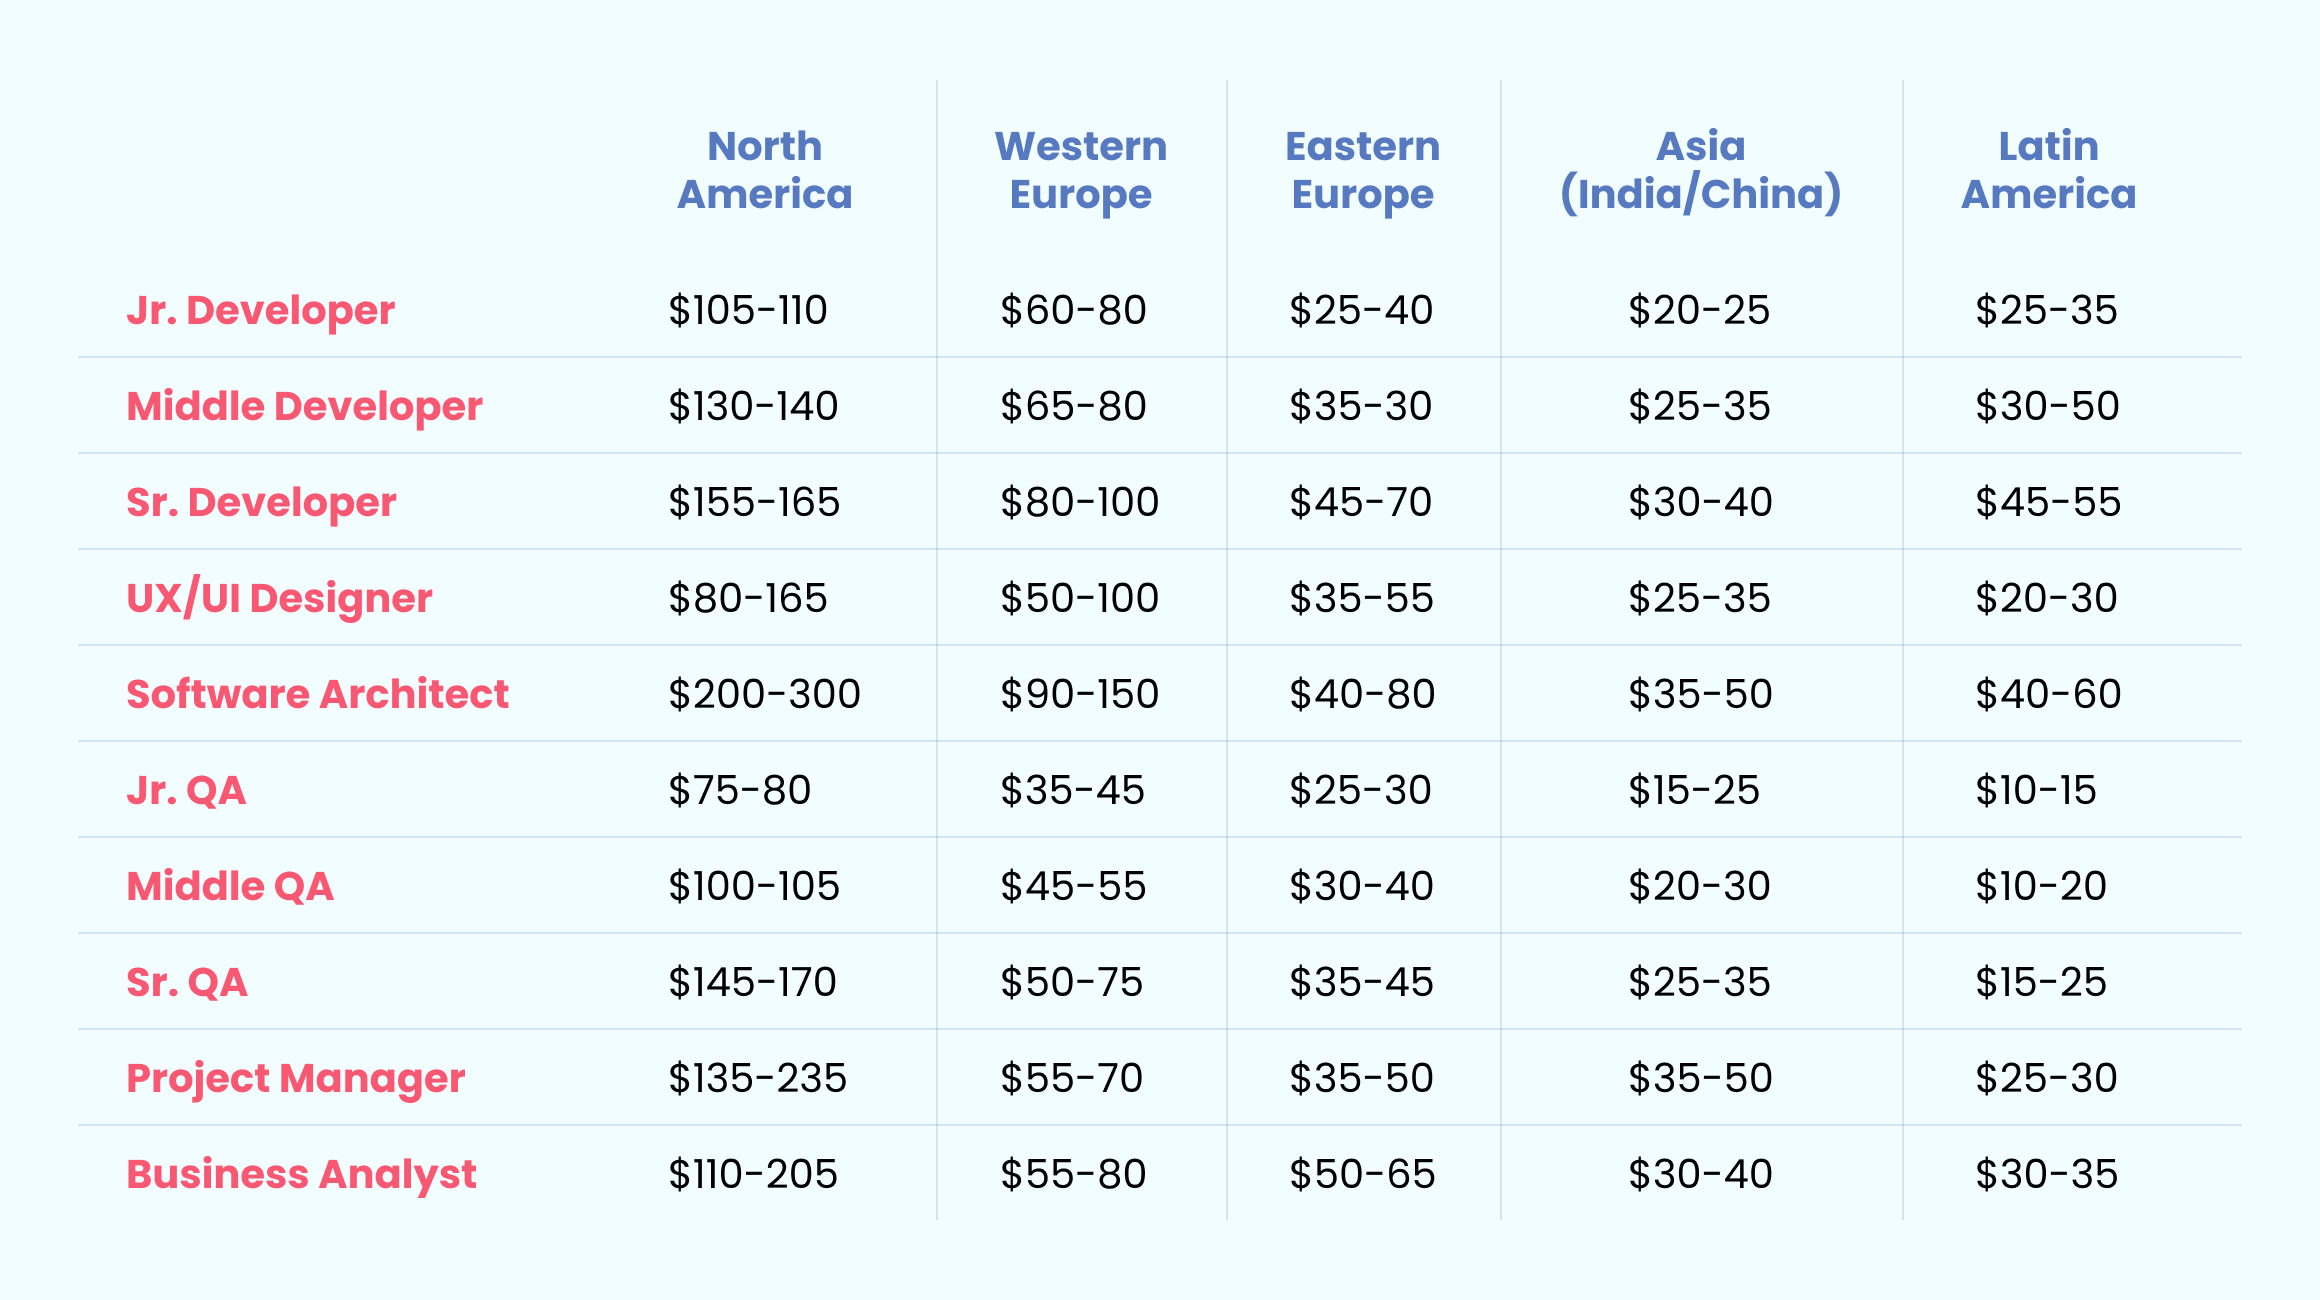 Table with hourly rates by regions